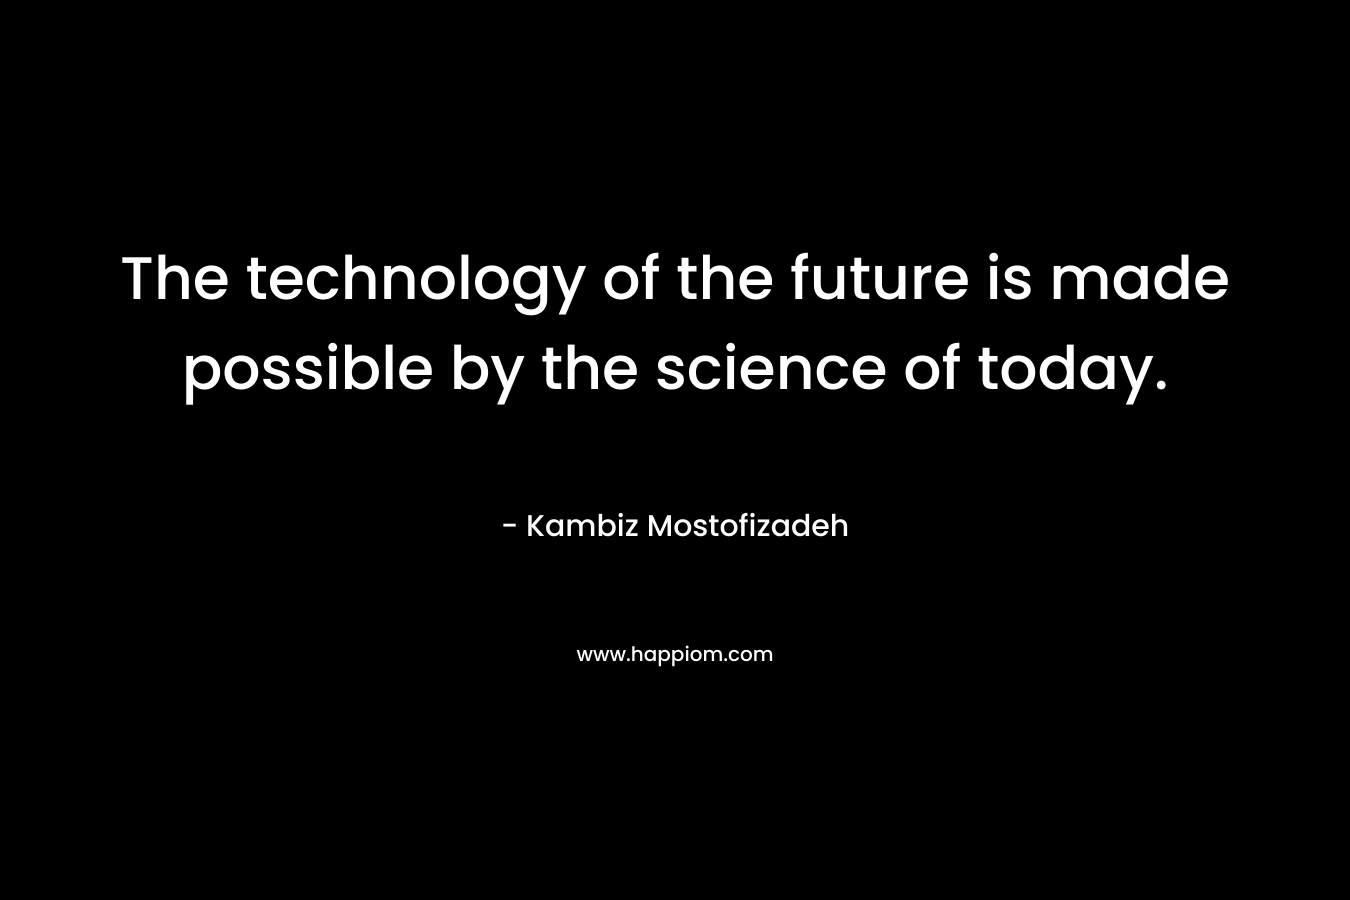 The technology of the future is made possible by the science of today.